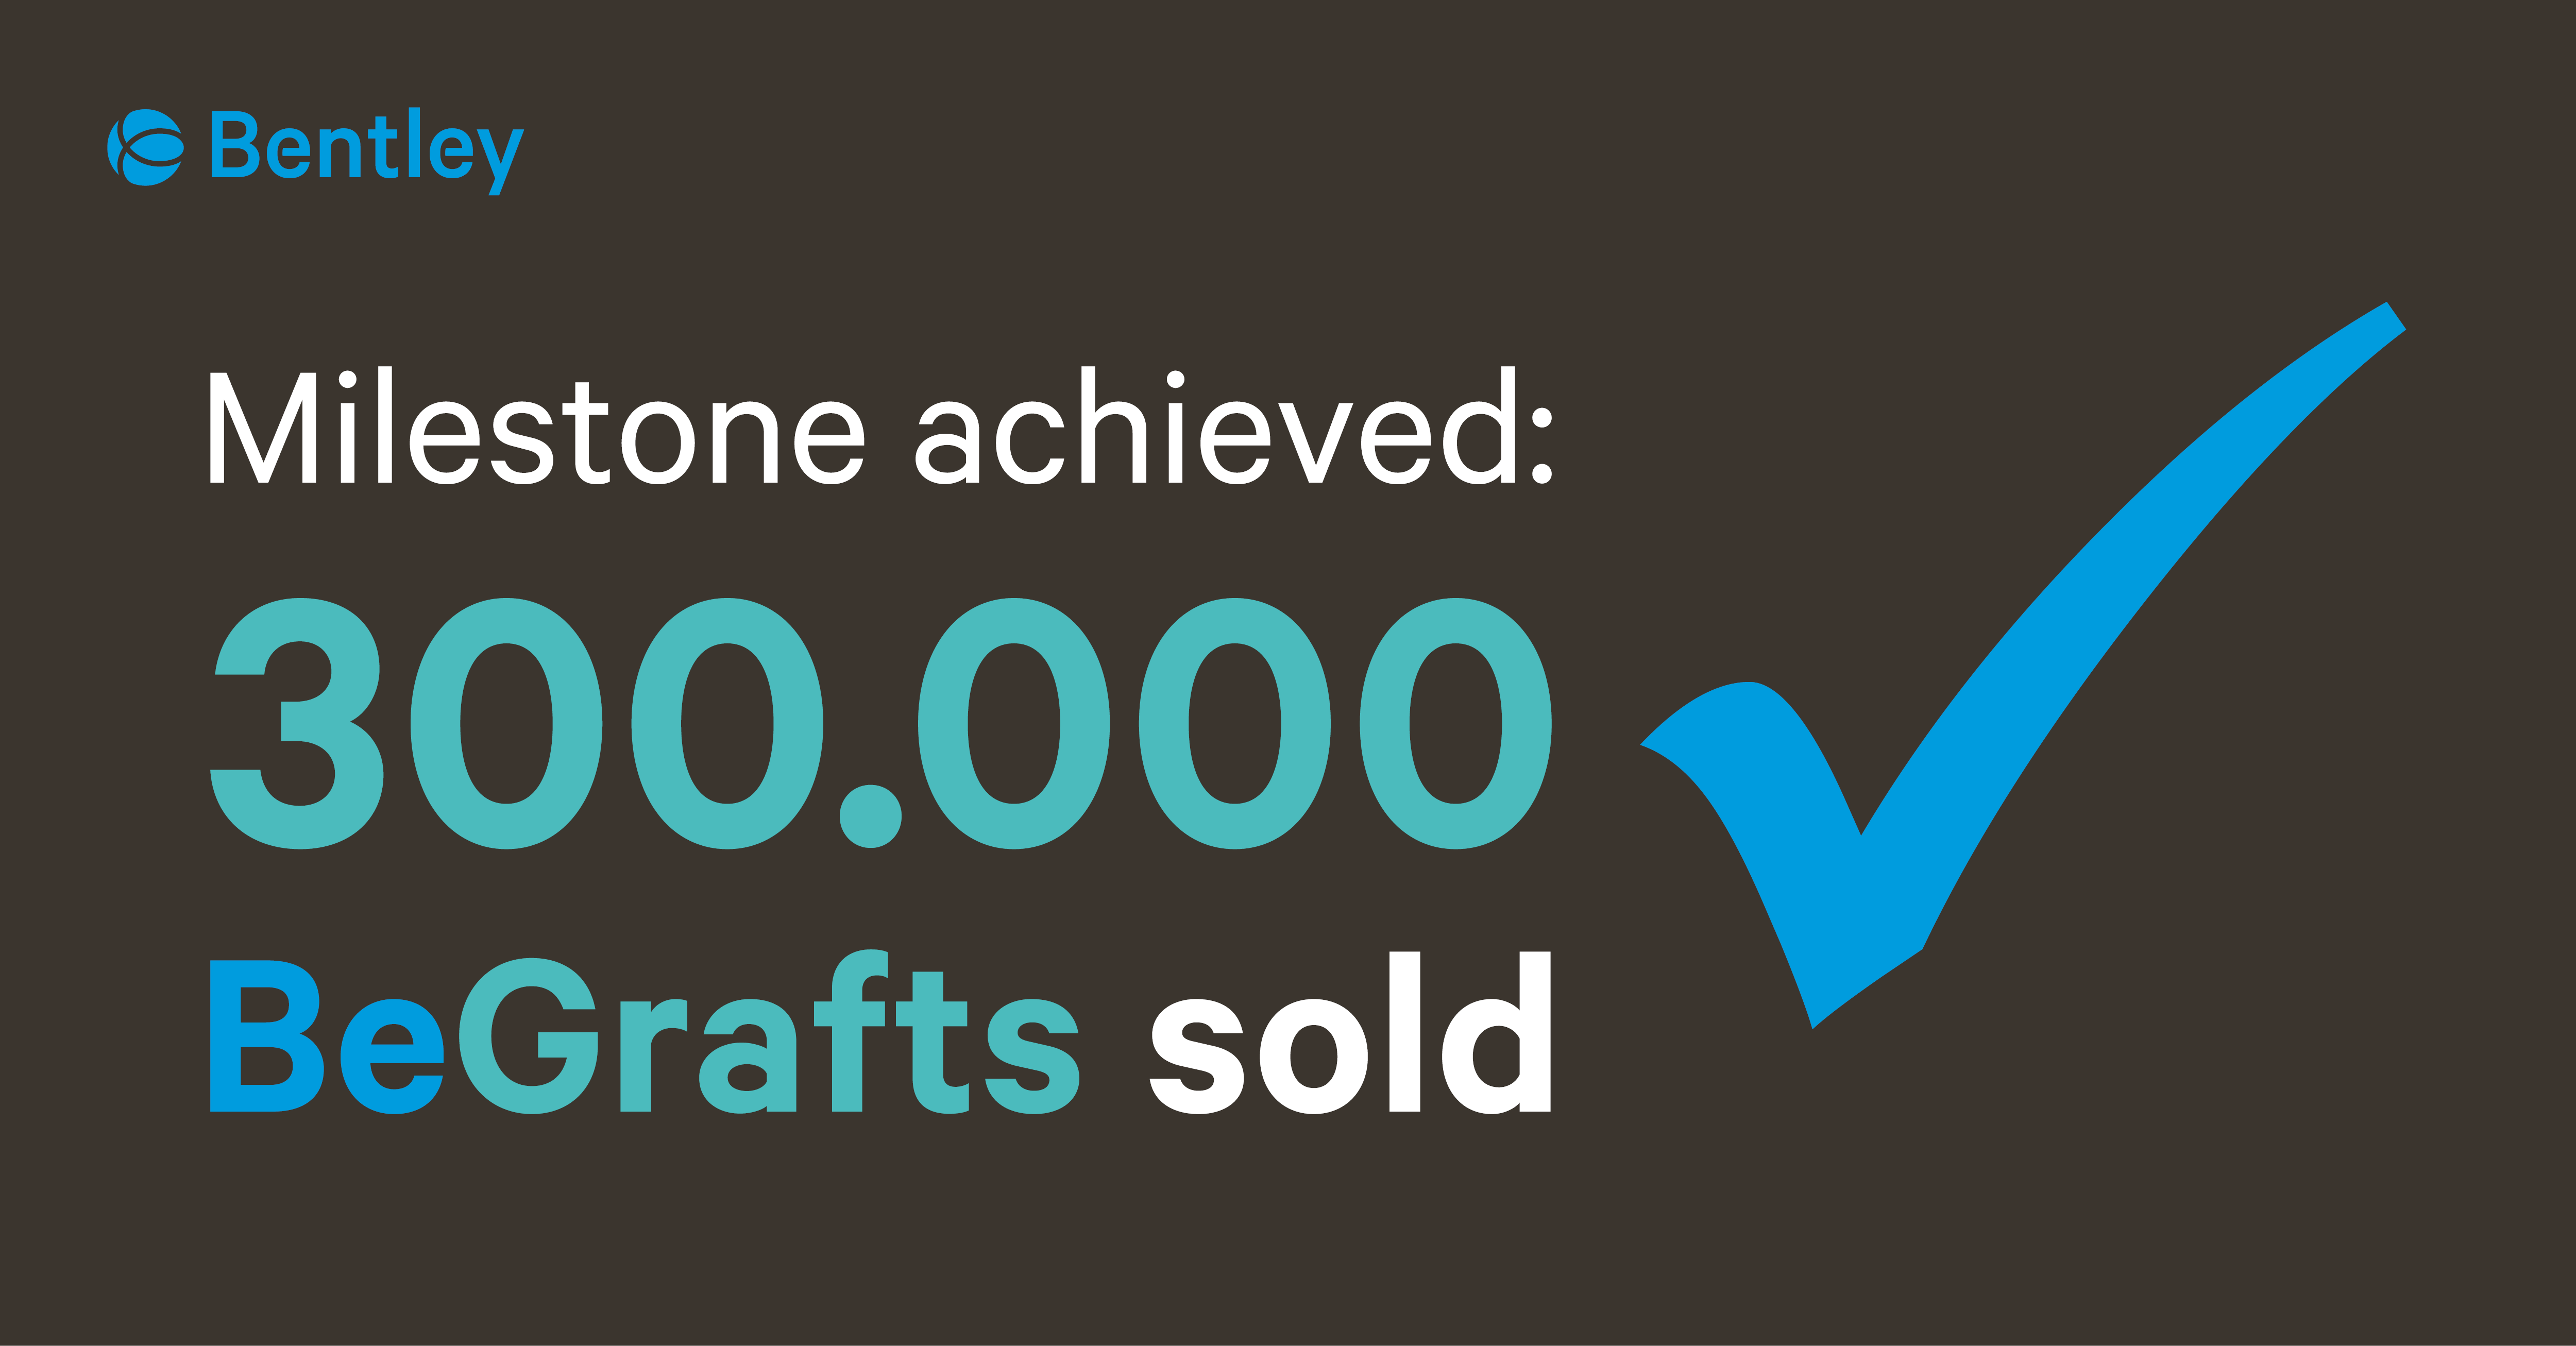 Another milestone achieved - Bentley sold its 300,000th BeGraft